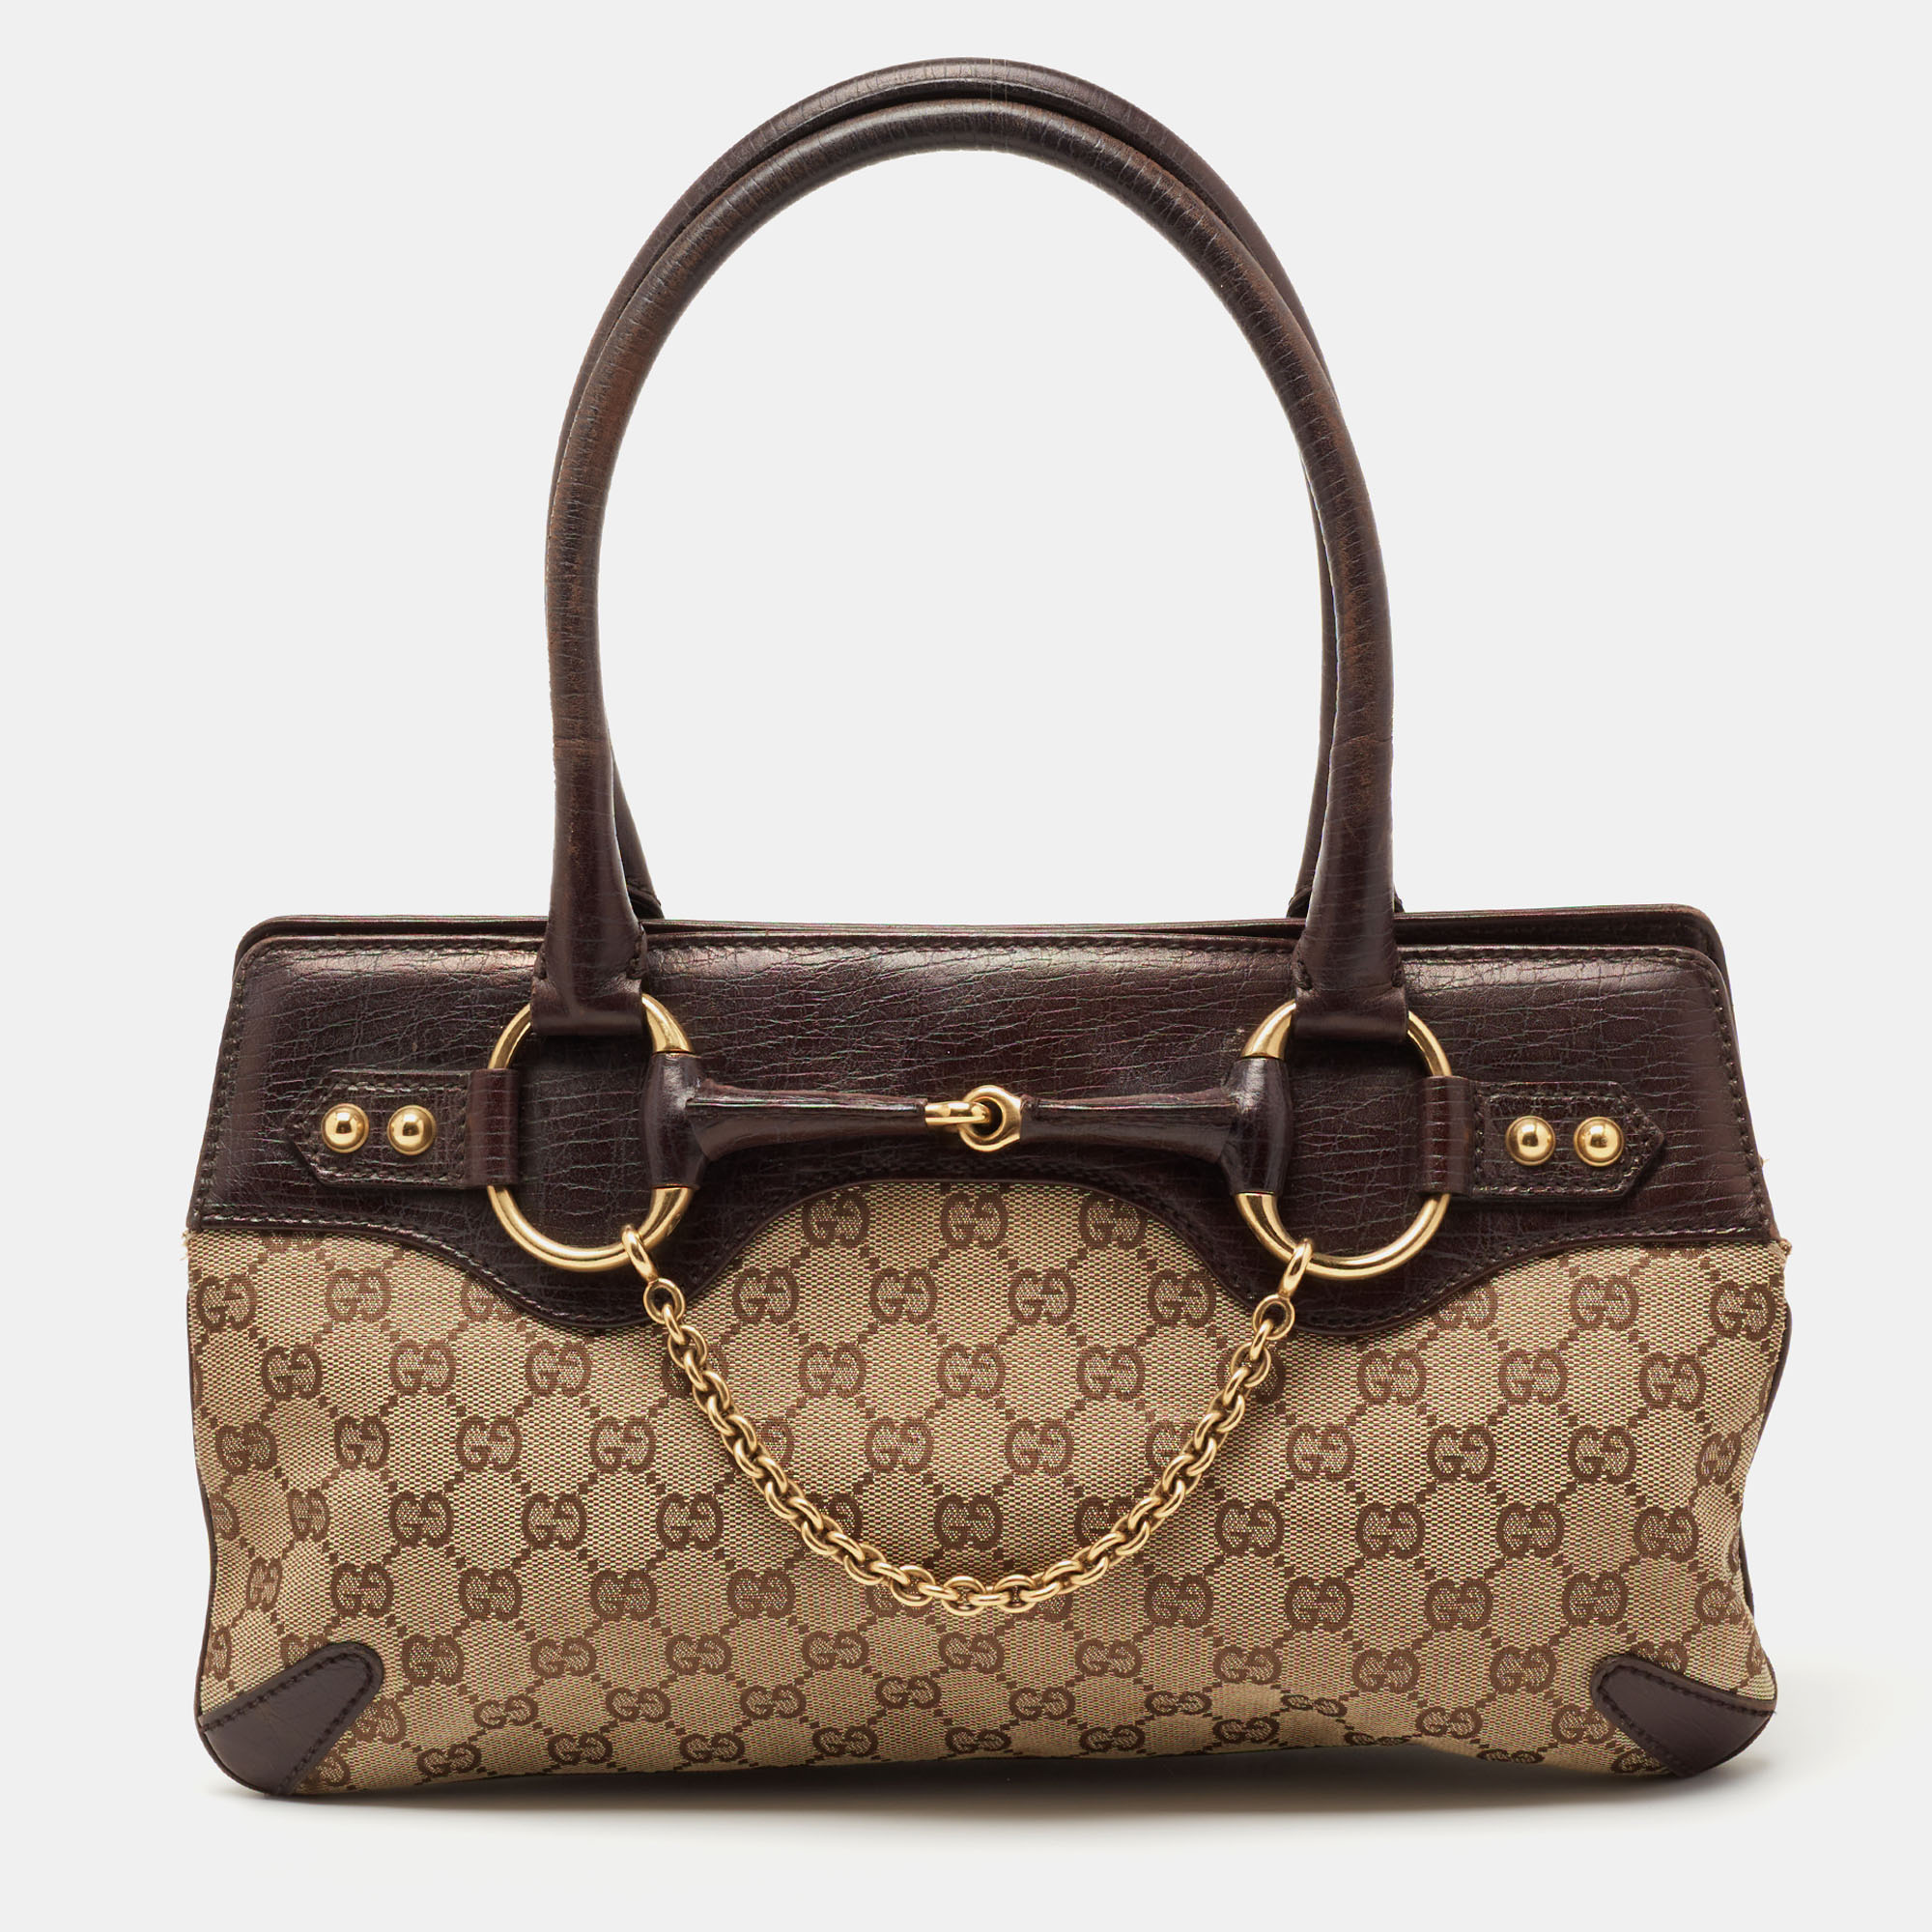 Gucci Beige/Dark Brown GG Canvas And Leather Horsebit Chain Tote